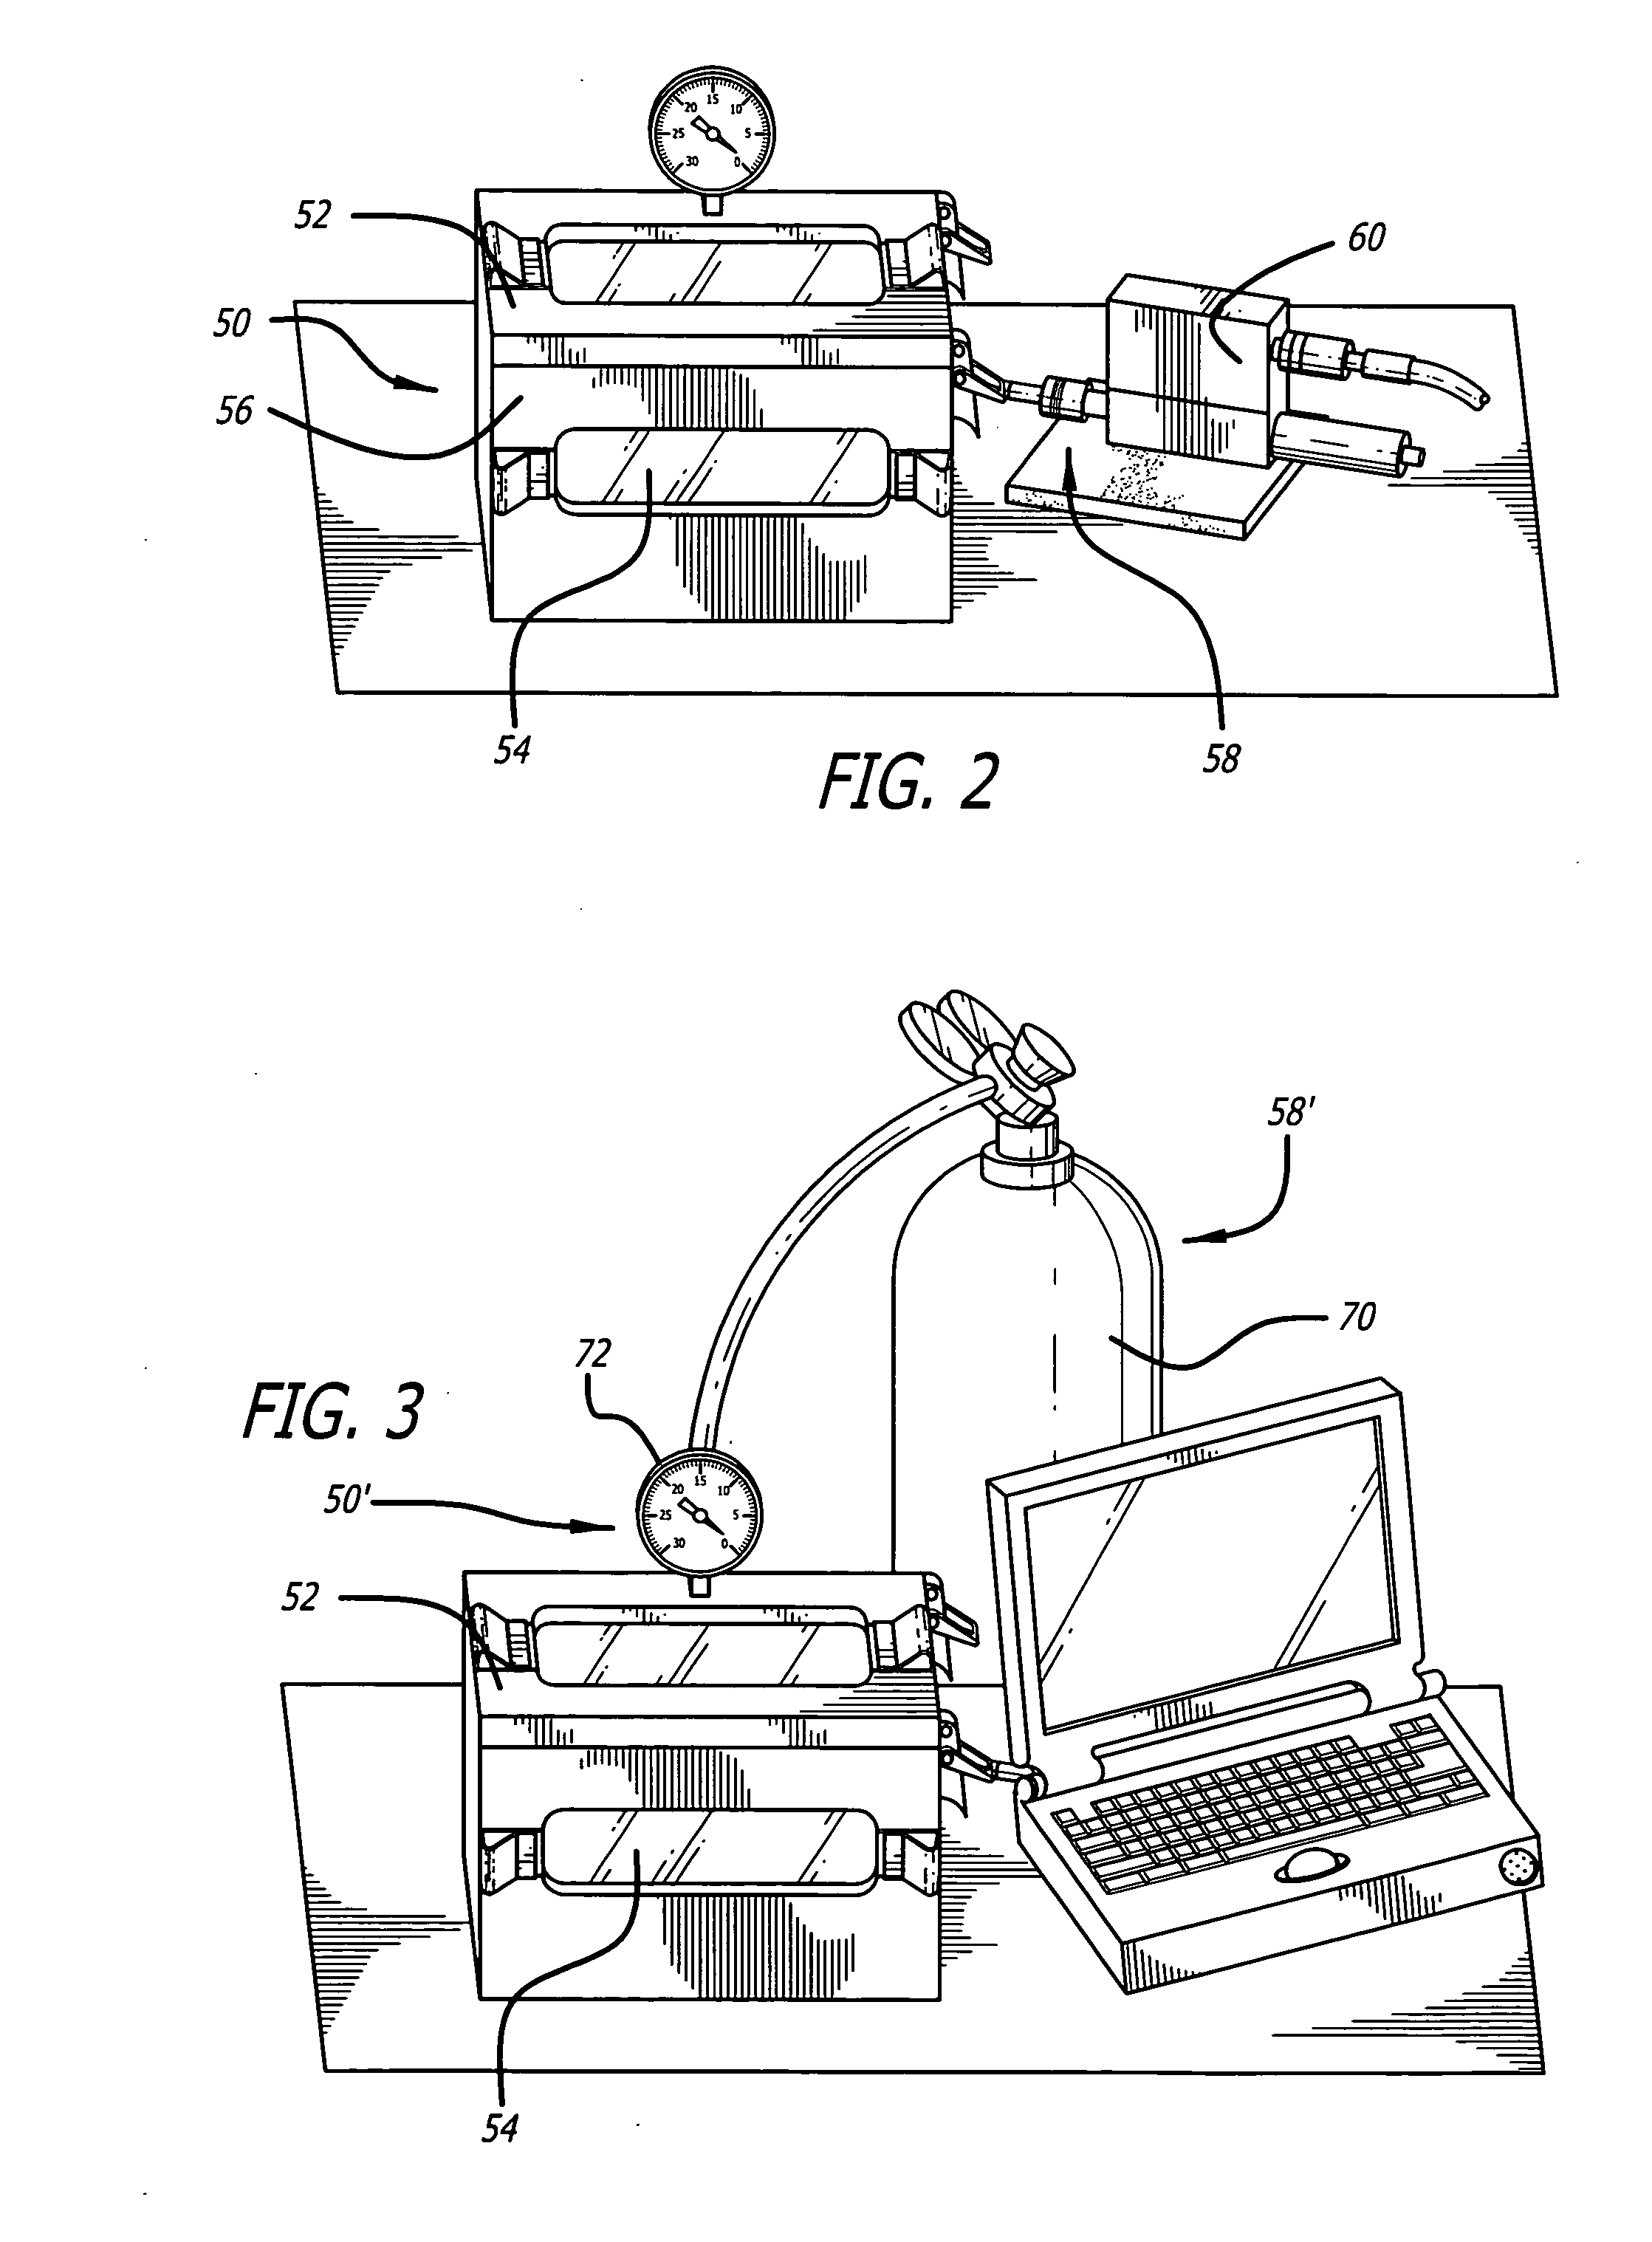 Servo track writing for ultra-high tpi disk drive in low density medium condition